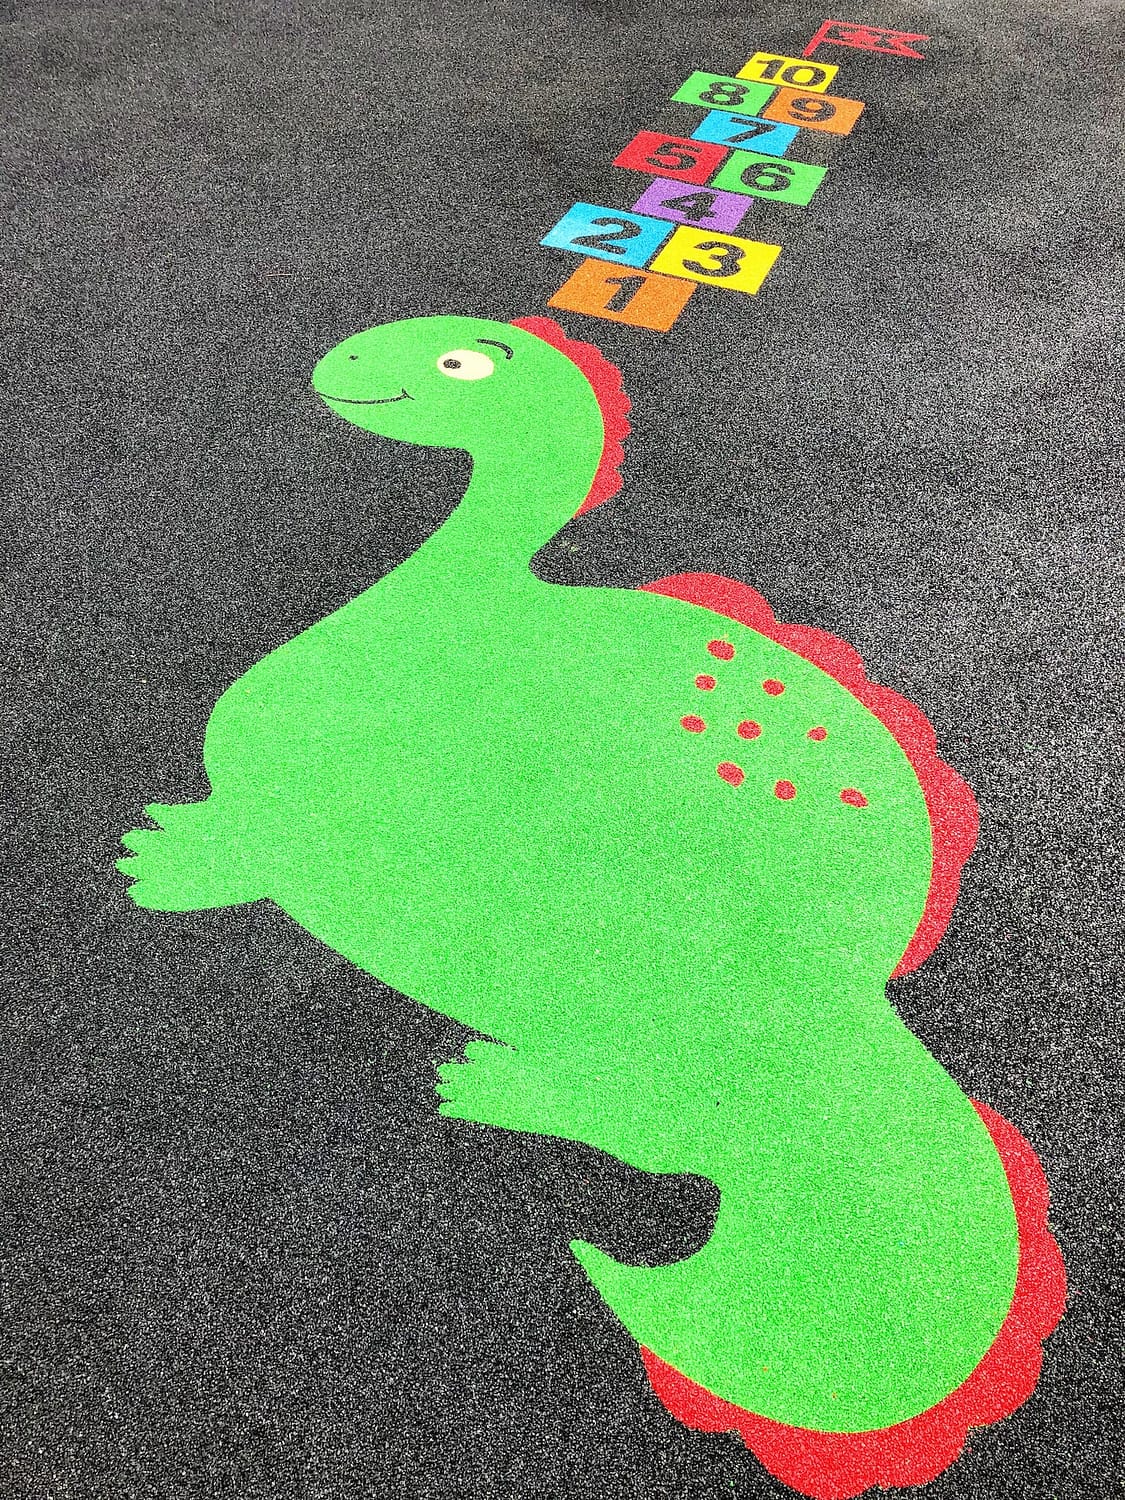 Dinosaur playground markings with a hop-scotch board